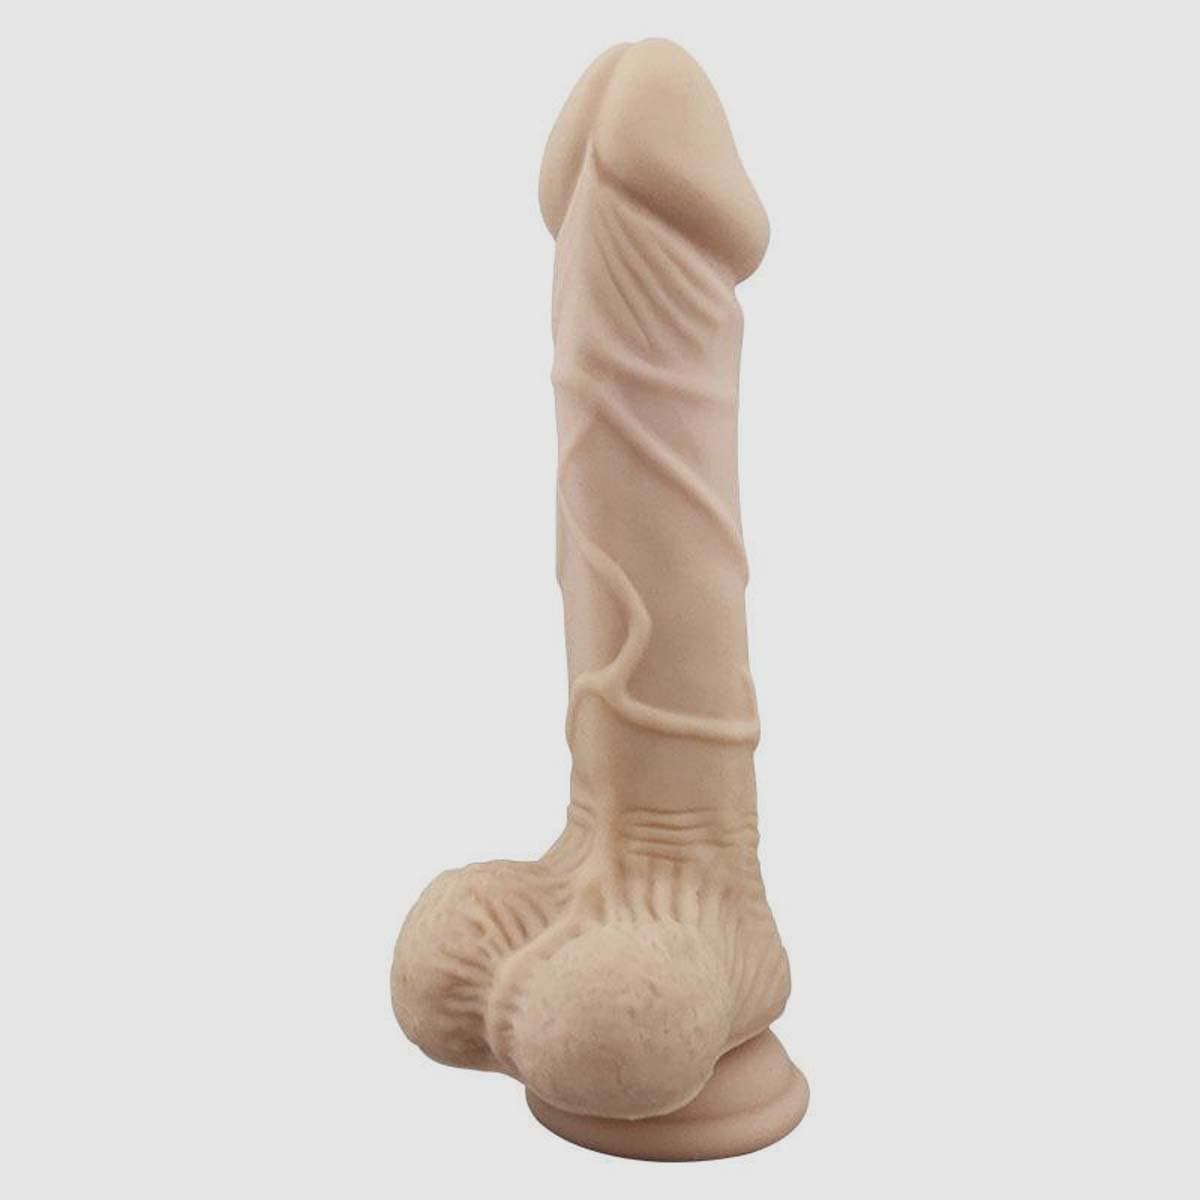 T&F knight HAPPINESS FILLER Dildo - 8" - Thorn & Feather